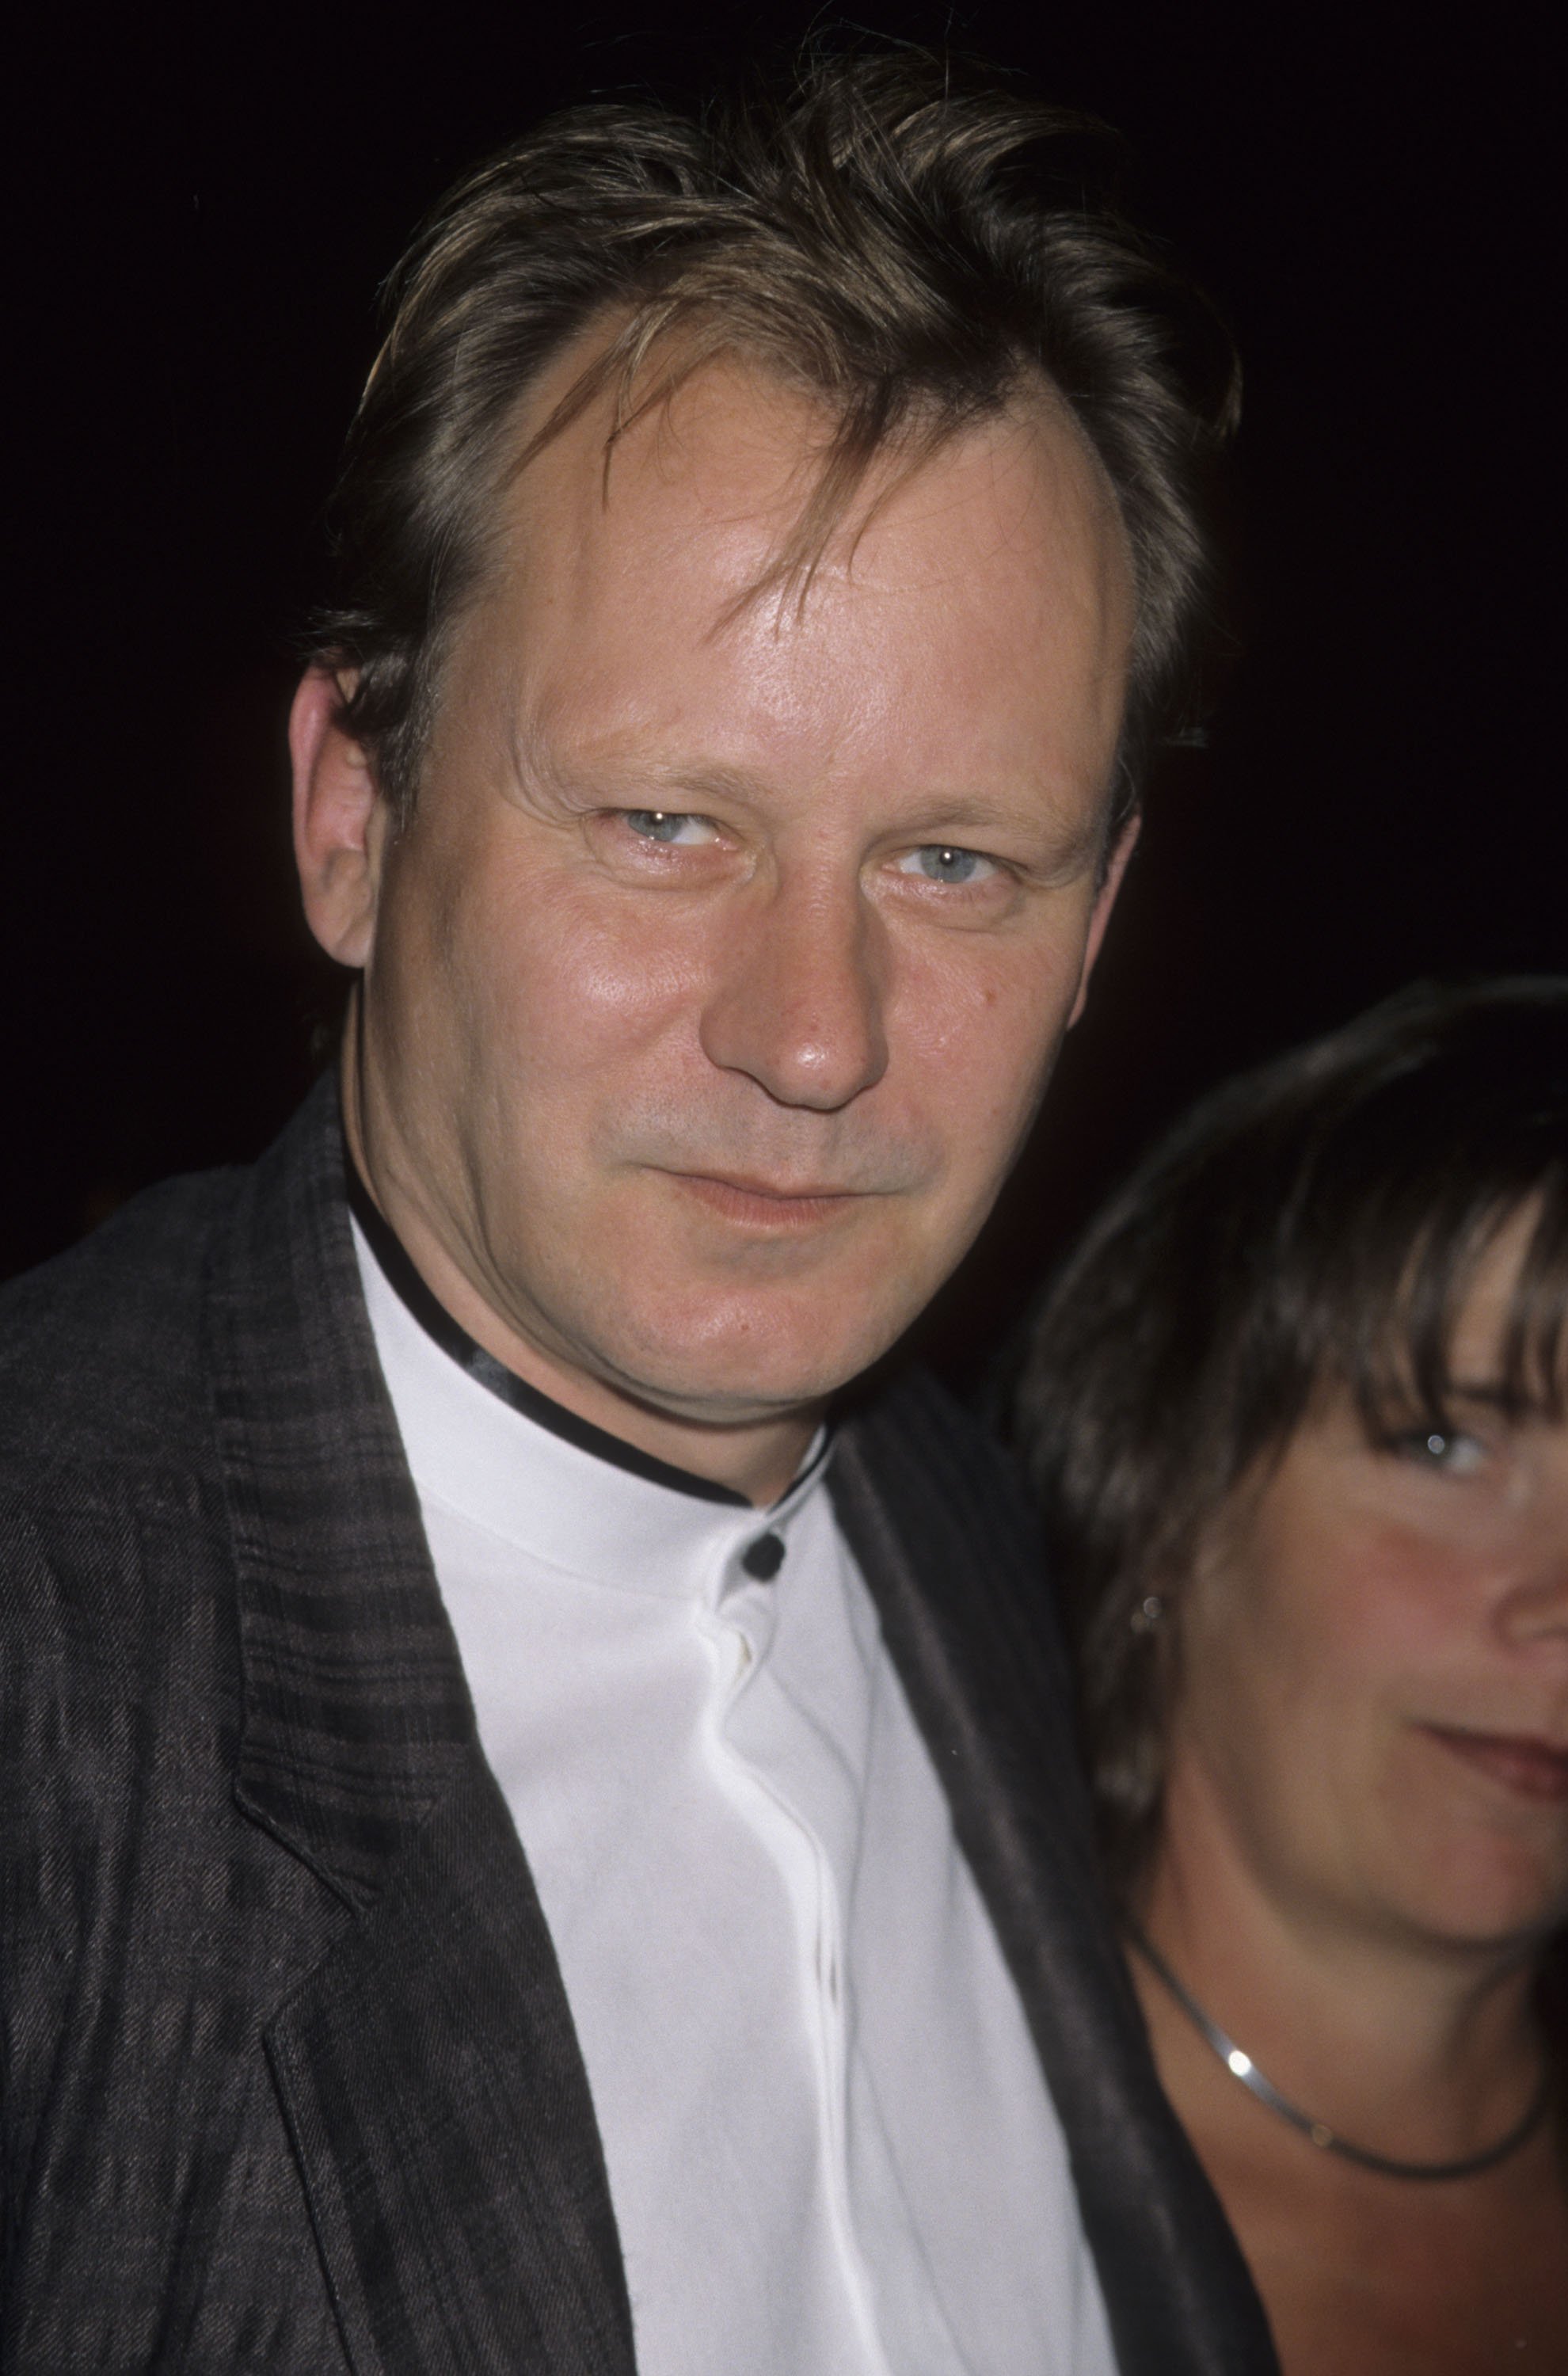 Actor Stellan Skarsgard and wife My Skarsgard attend the premiere of Ronin on September 23, 1998 at the Academy Theater in Beverly Hills, California. | Source: Getty Images